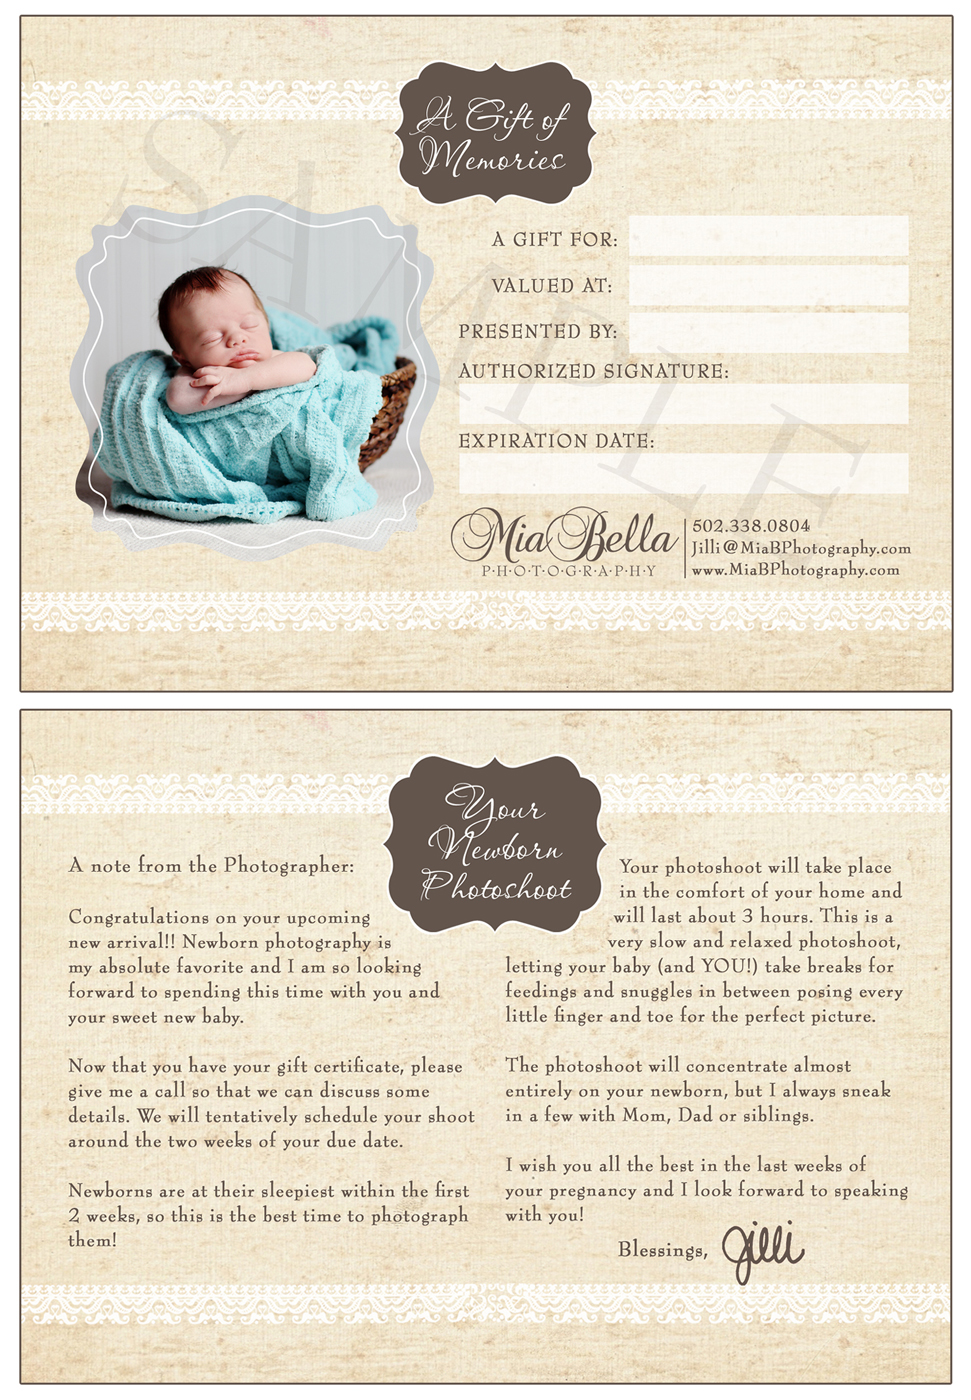 Photography Session Gift Certificate Template from 3.bp.blogspot.com